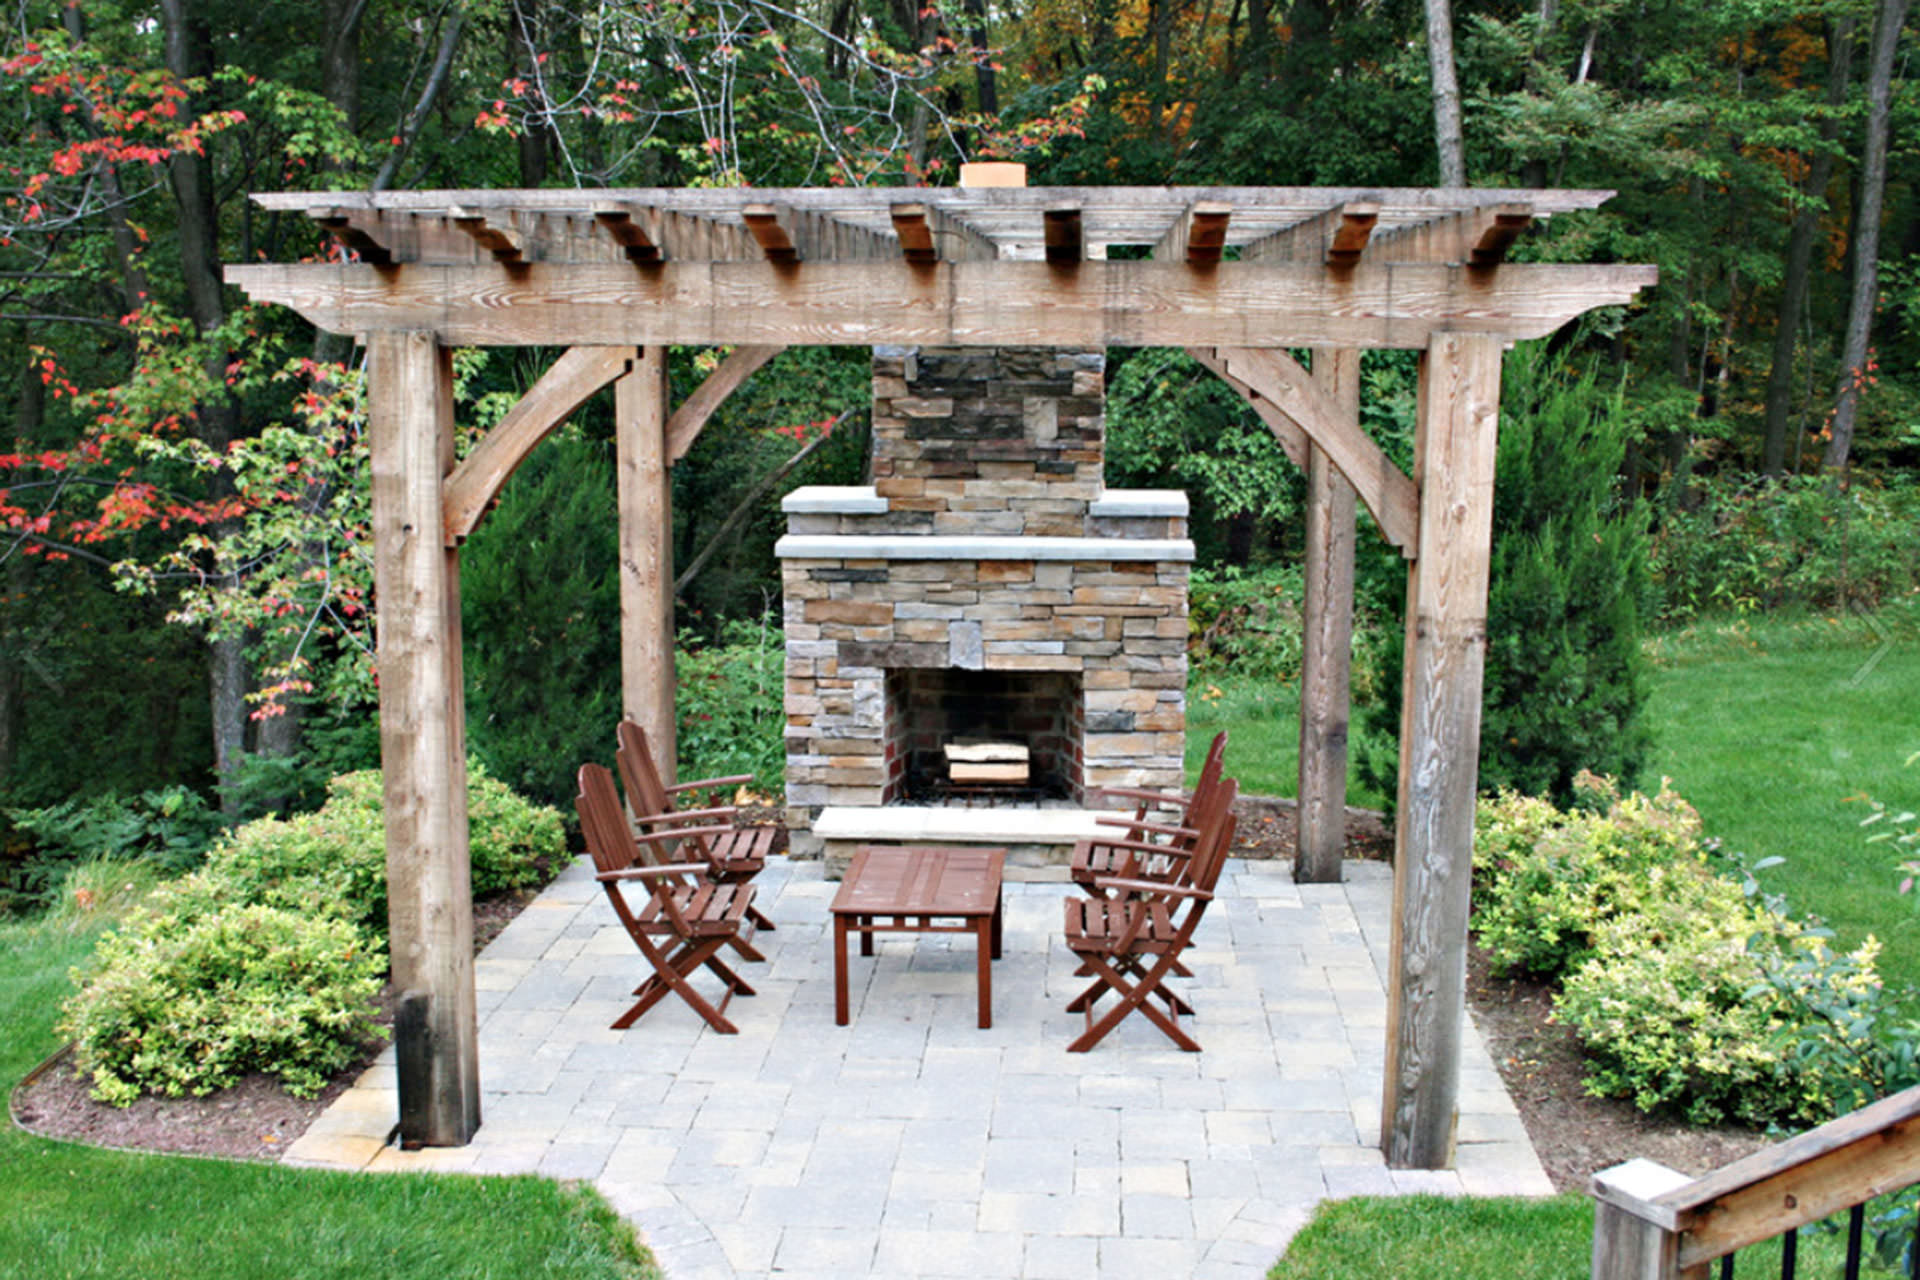 Outdoor Structure with fireplace and seating area